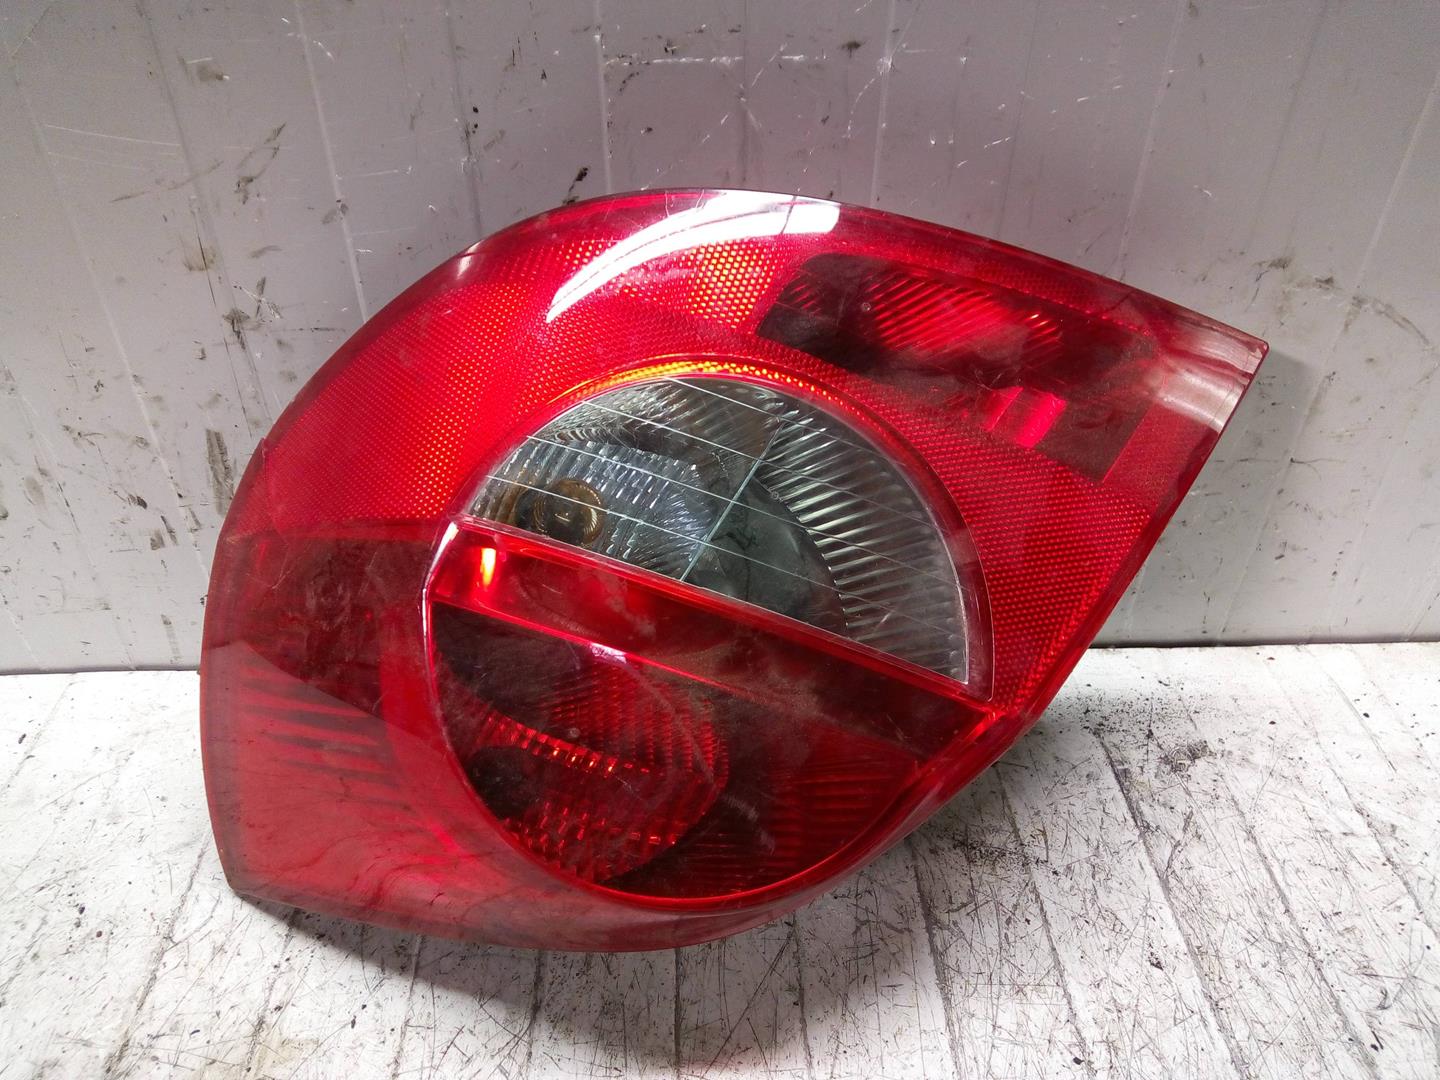 RENAULT Clio 3 generation (2005-2012) Rear Right Taillight Lamp 89035080, 128981 18552475